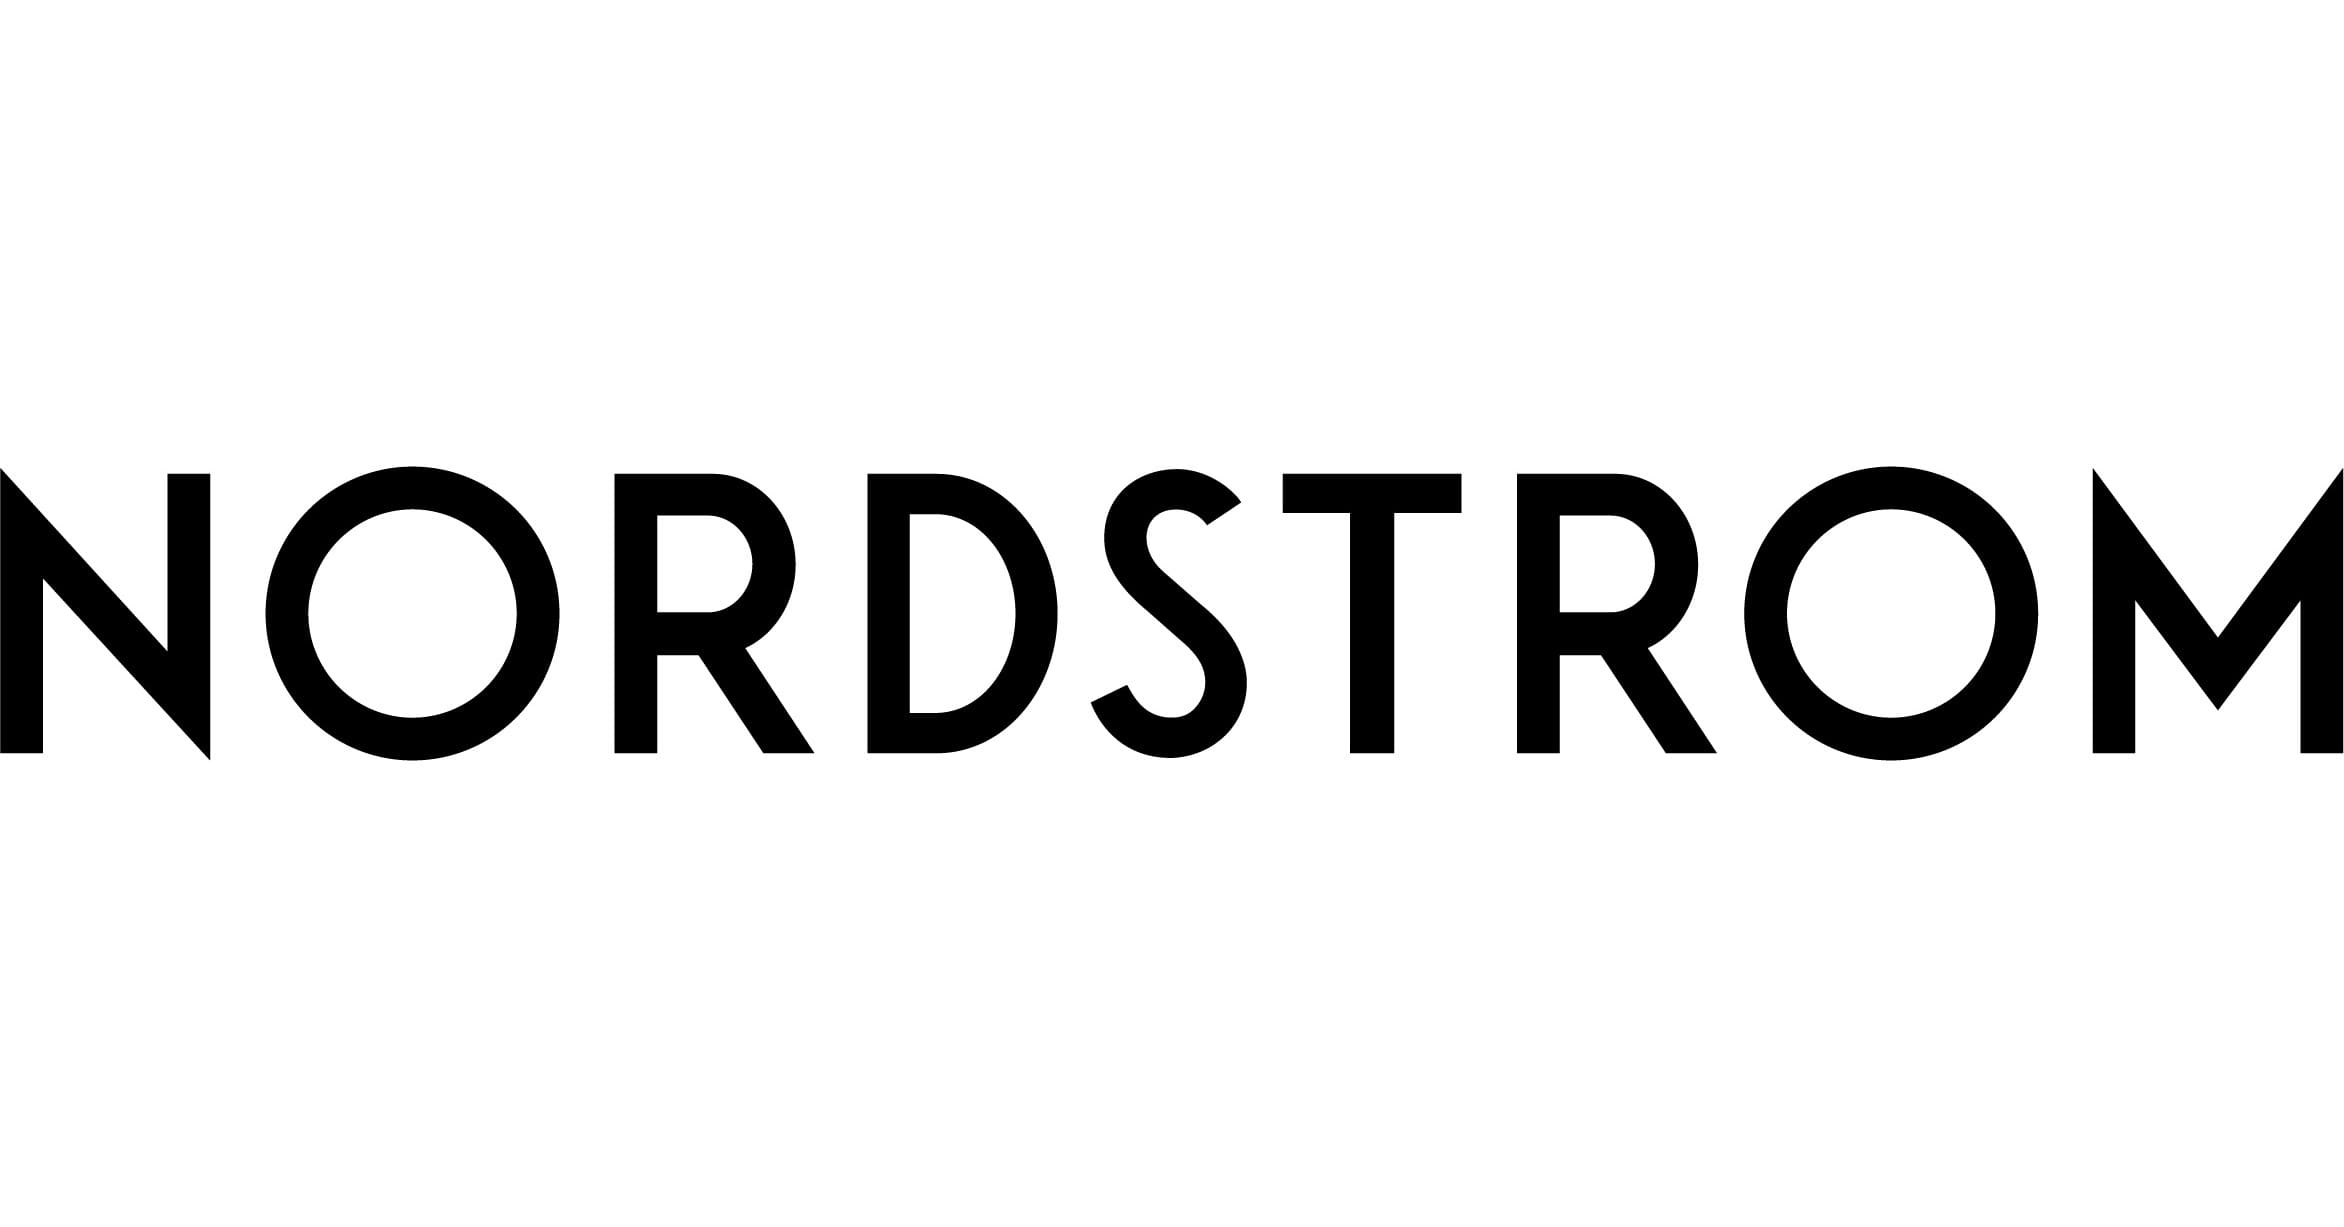 Nordstrom logo logo and symbol, meaning, history, PNG